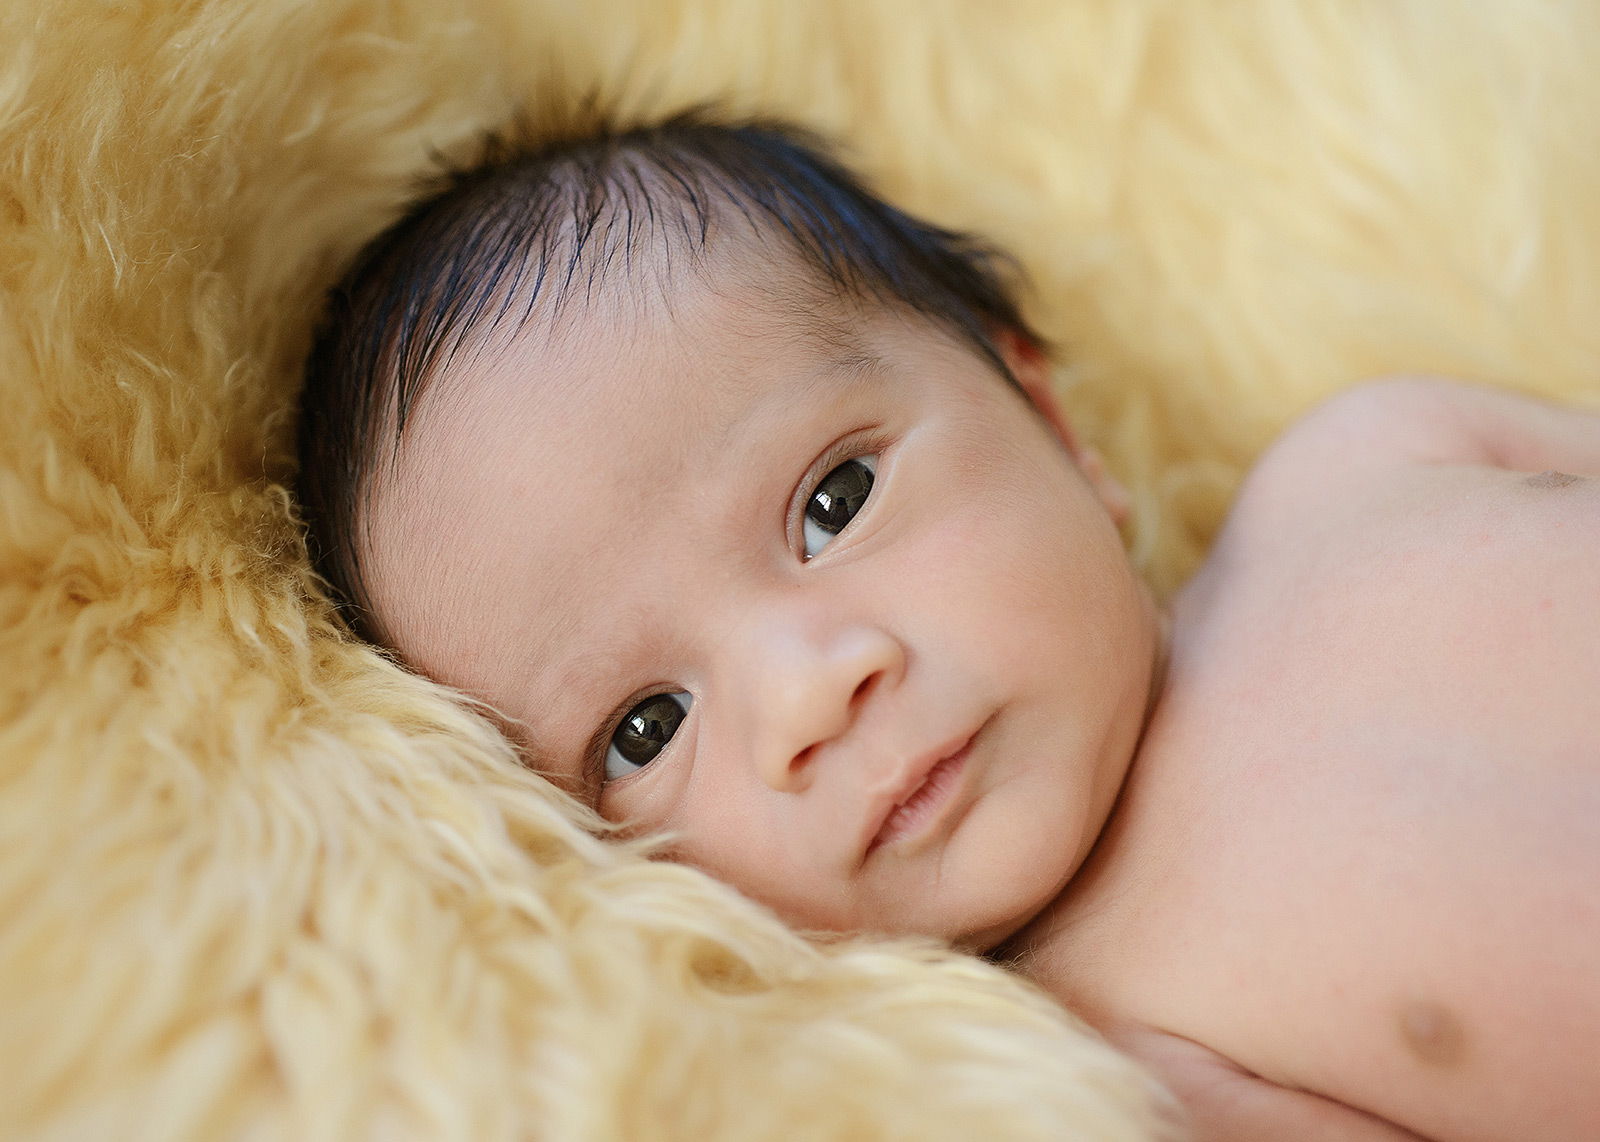 Newborn baby looking straight at camera on faux fur throw